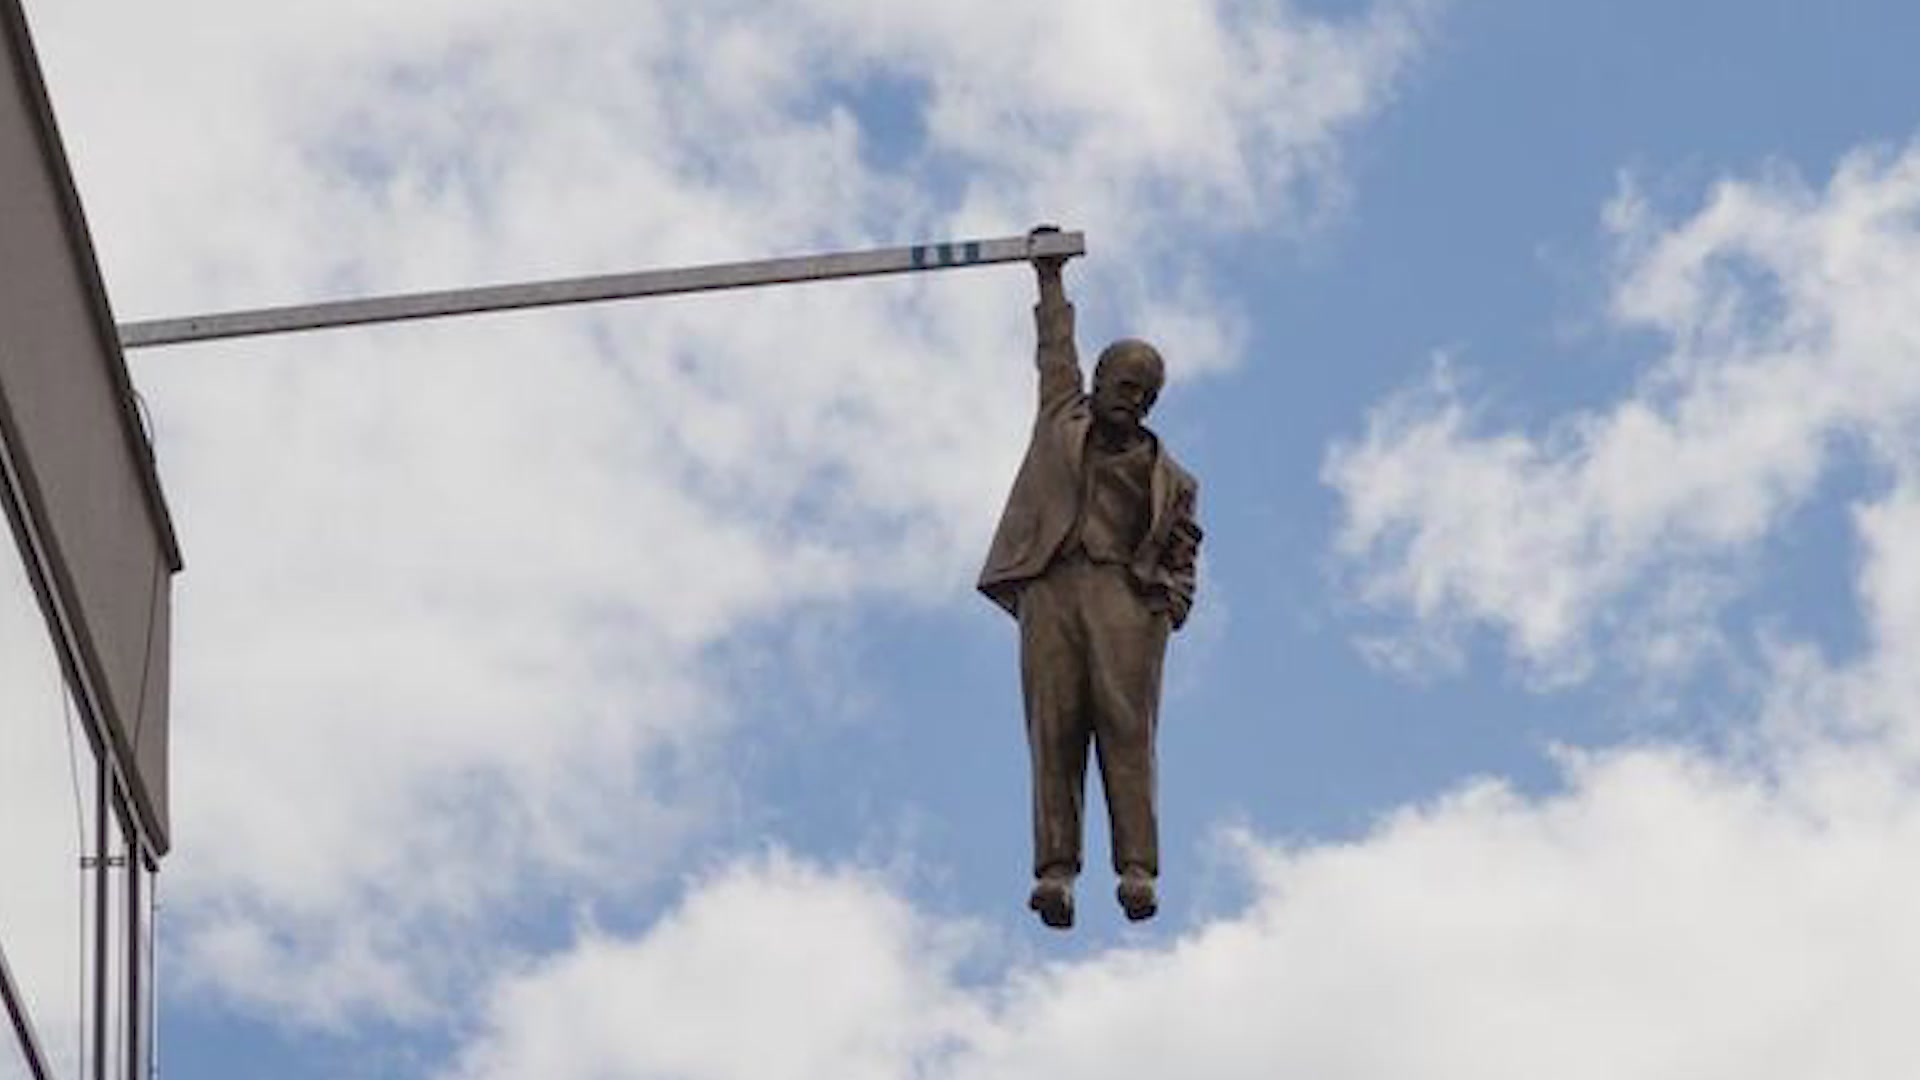 The only human sculpture hanging in mid-air in the world has frightened many tourists. Who is he?